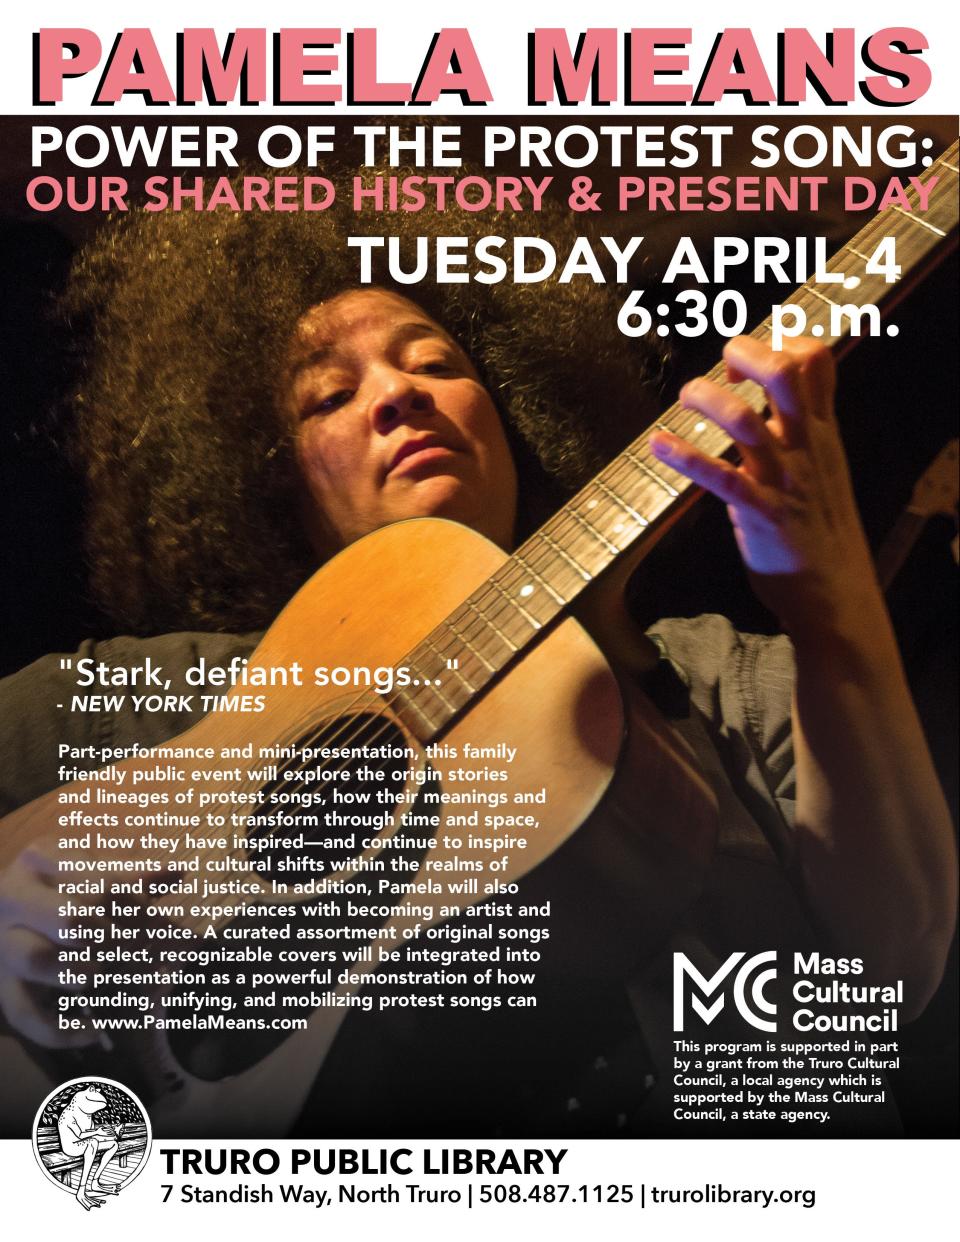 Power of the Protest Song will be featured at Truro Library.